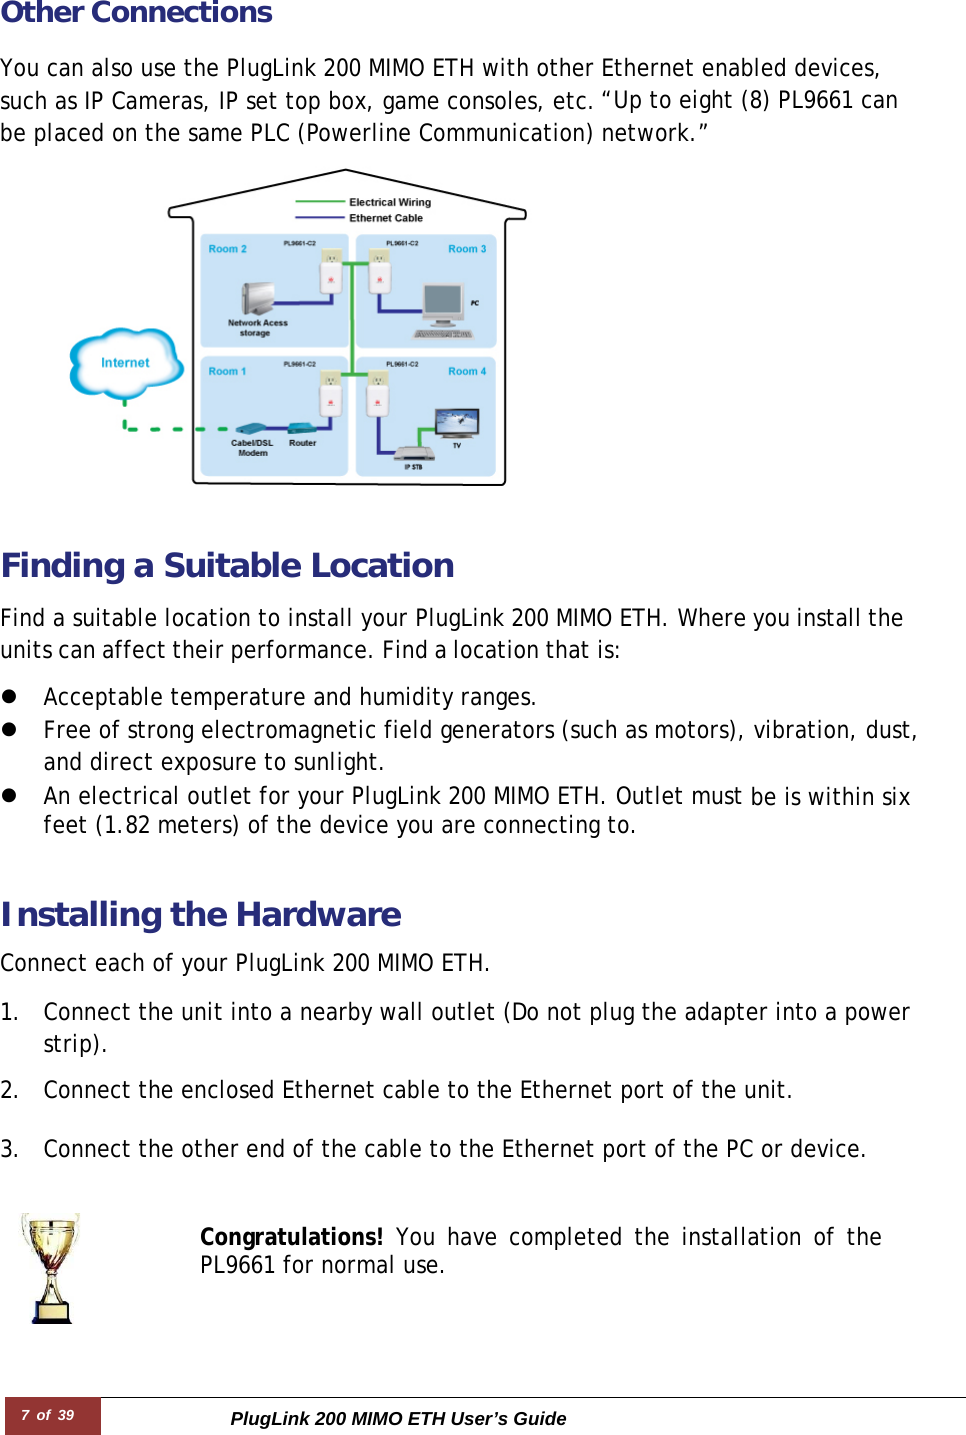 7 of 39 PlugLink 200 MIMO ETH User’s Guide        Other Connections You can also use the PlugLink 200 MIMO ETH with other Ethernet enabled devices, such as IP Cameras, IP set top box, game consoles, etc.“Up to eight (8) PL9661 can be placed on the same PLC (Powerline Communication) network.”   Finding a Suitable Location  Find a suitable location to install your PlugLink 200 MIMO ETH. Where you install the units can affect their performance. Find a location that is:  z Acceptable temperature and humidity ranges. z Free of strong electromagnetic field generators (such as motors), vibration, dust, and direct exposure to sunlight. z An electrical outlet for your PlugLink 200 MIMO ETH. Outlet must be is within six feet (1.82 meters) of the device you are connecting to.   Installing the Hardware  Connect each of your PlugLink 200 MIMO ETH.  1. Connect the unit into a nearby wall outlet (Do not plug the adapter into a power strip).  2. Connect the enclosed Ethernet cable to the Ethernet port of the unit.   3. Connect the other end of the cable to the Ethernet port of the PC or device.   Congratulations! You have completed the installation of the PL9661 for normal use. 